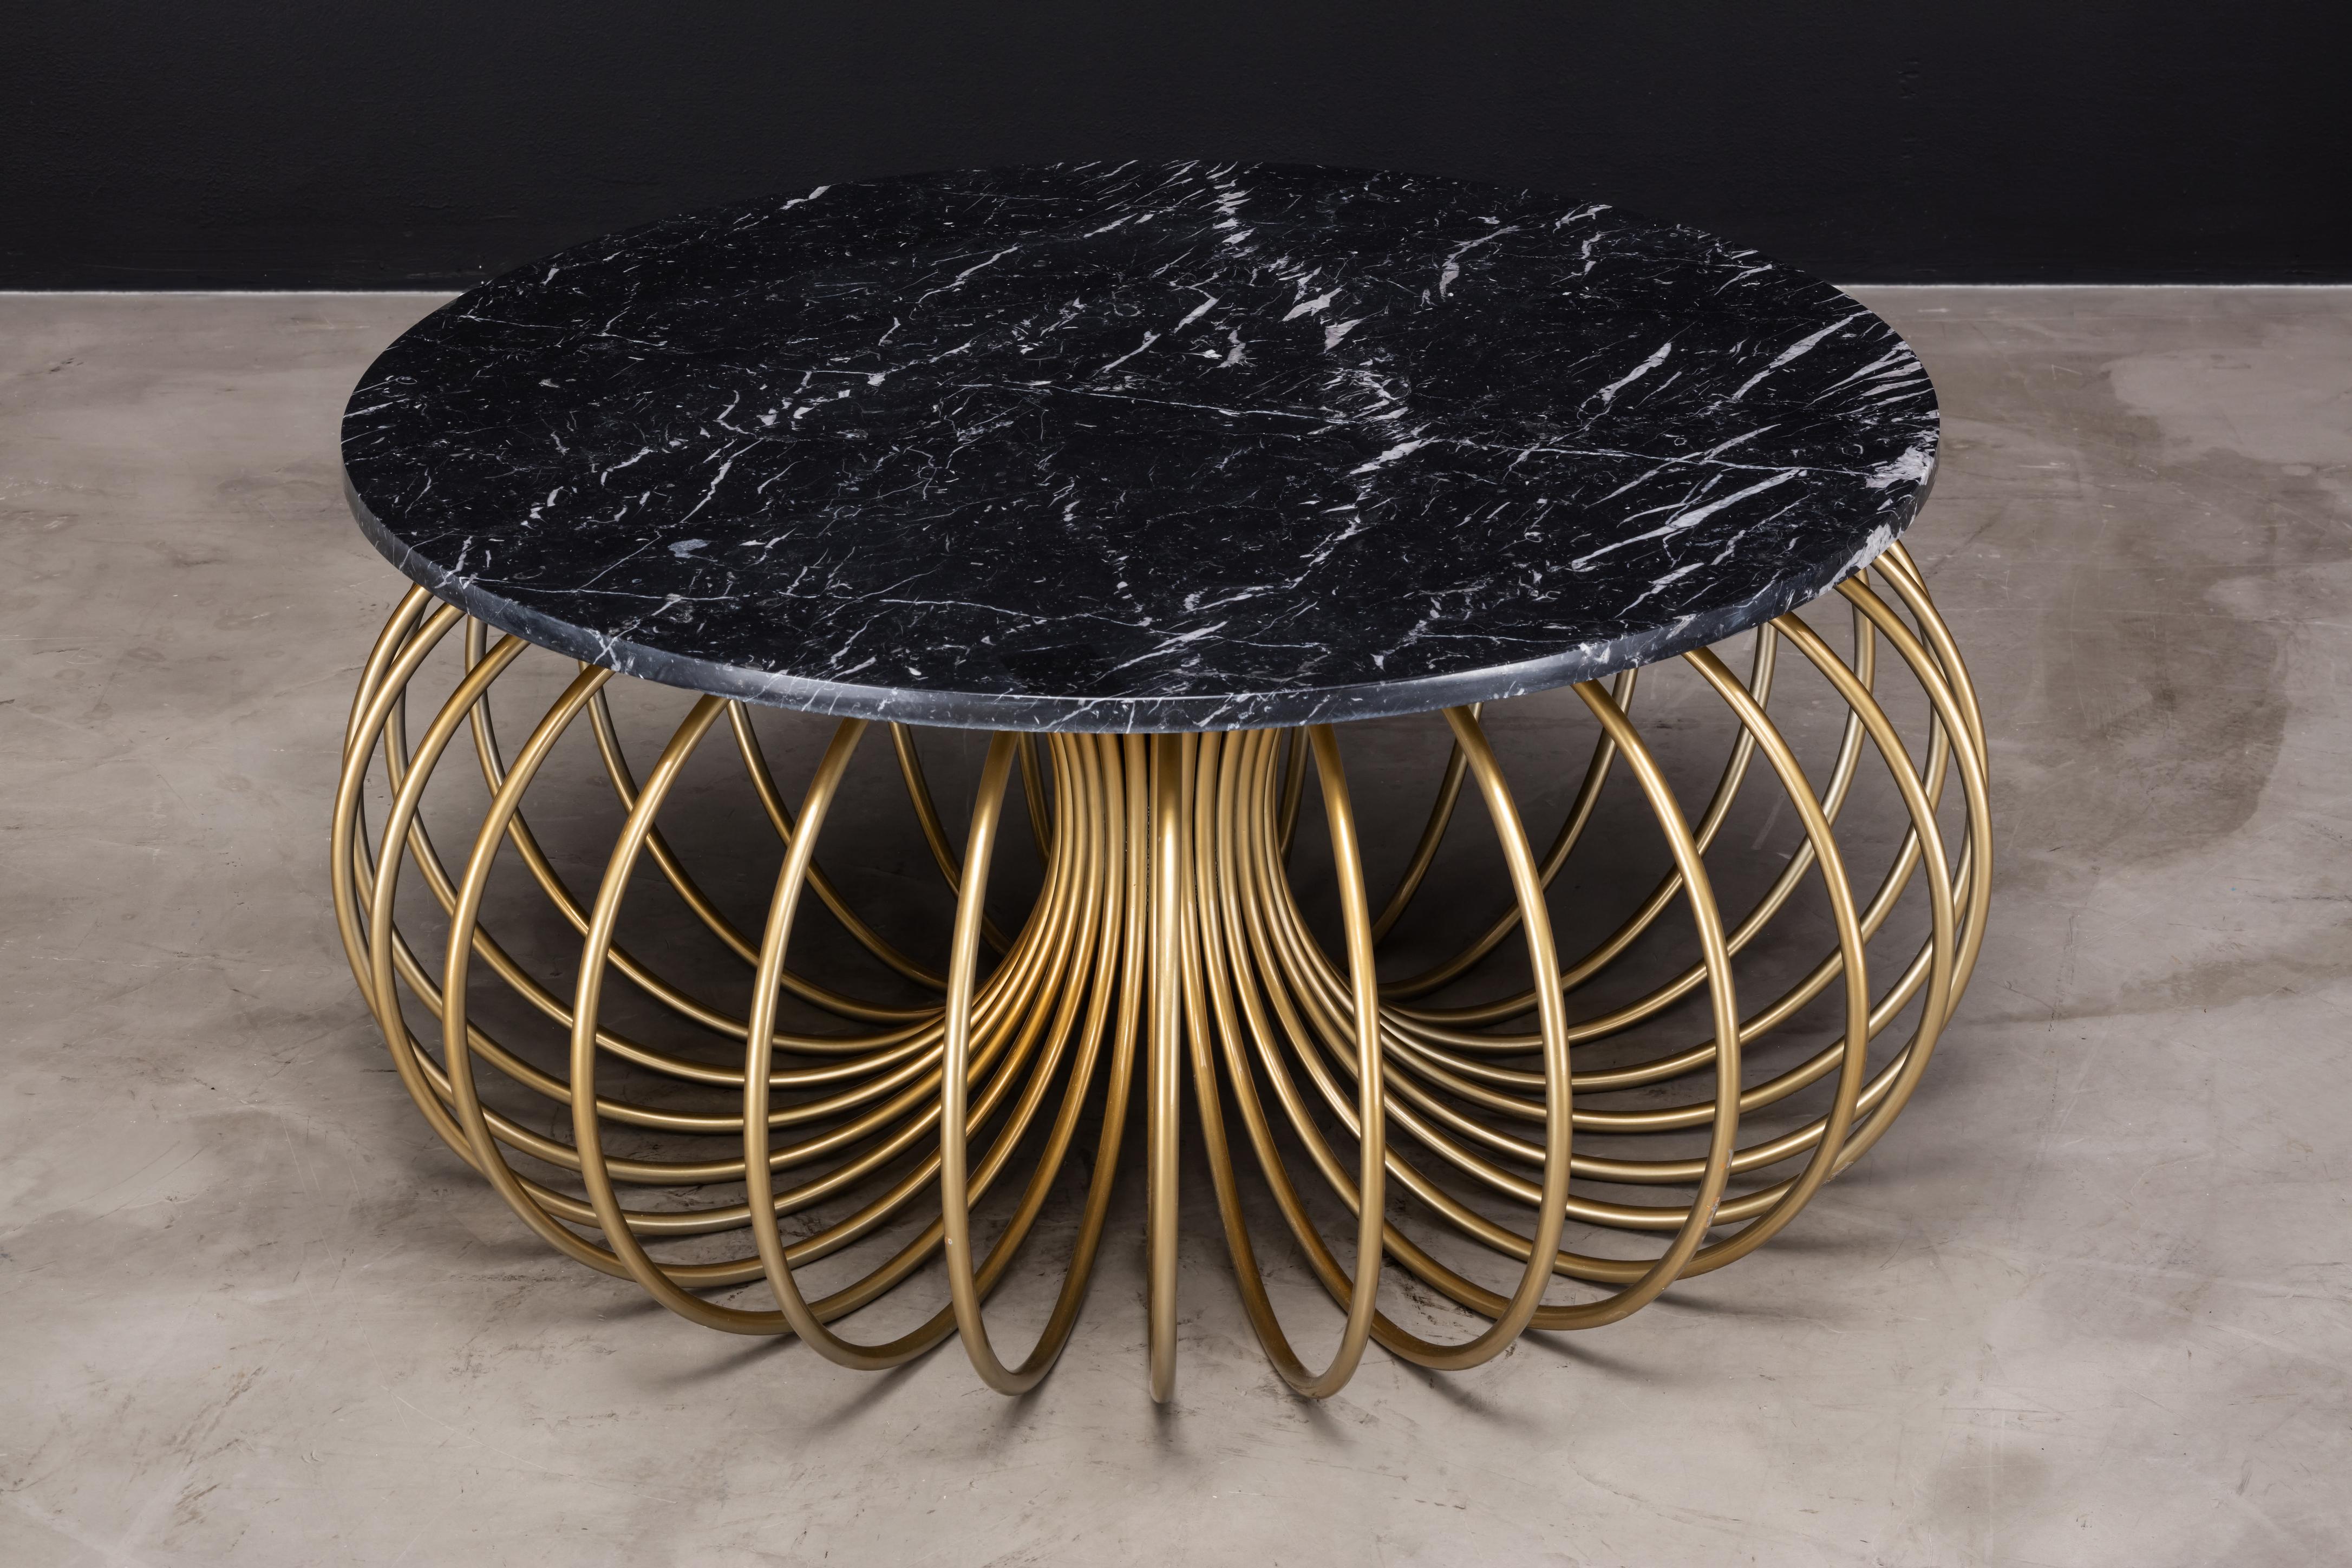 SLINK COFFEE TABLE - Nero Marquina Marble and Gold Powder Coated Metal

The Slink coffee table is a sleek and modern cocktail table that is sure to make a statement in any living room. The table is constructed from powder-coated metal, providing a